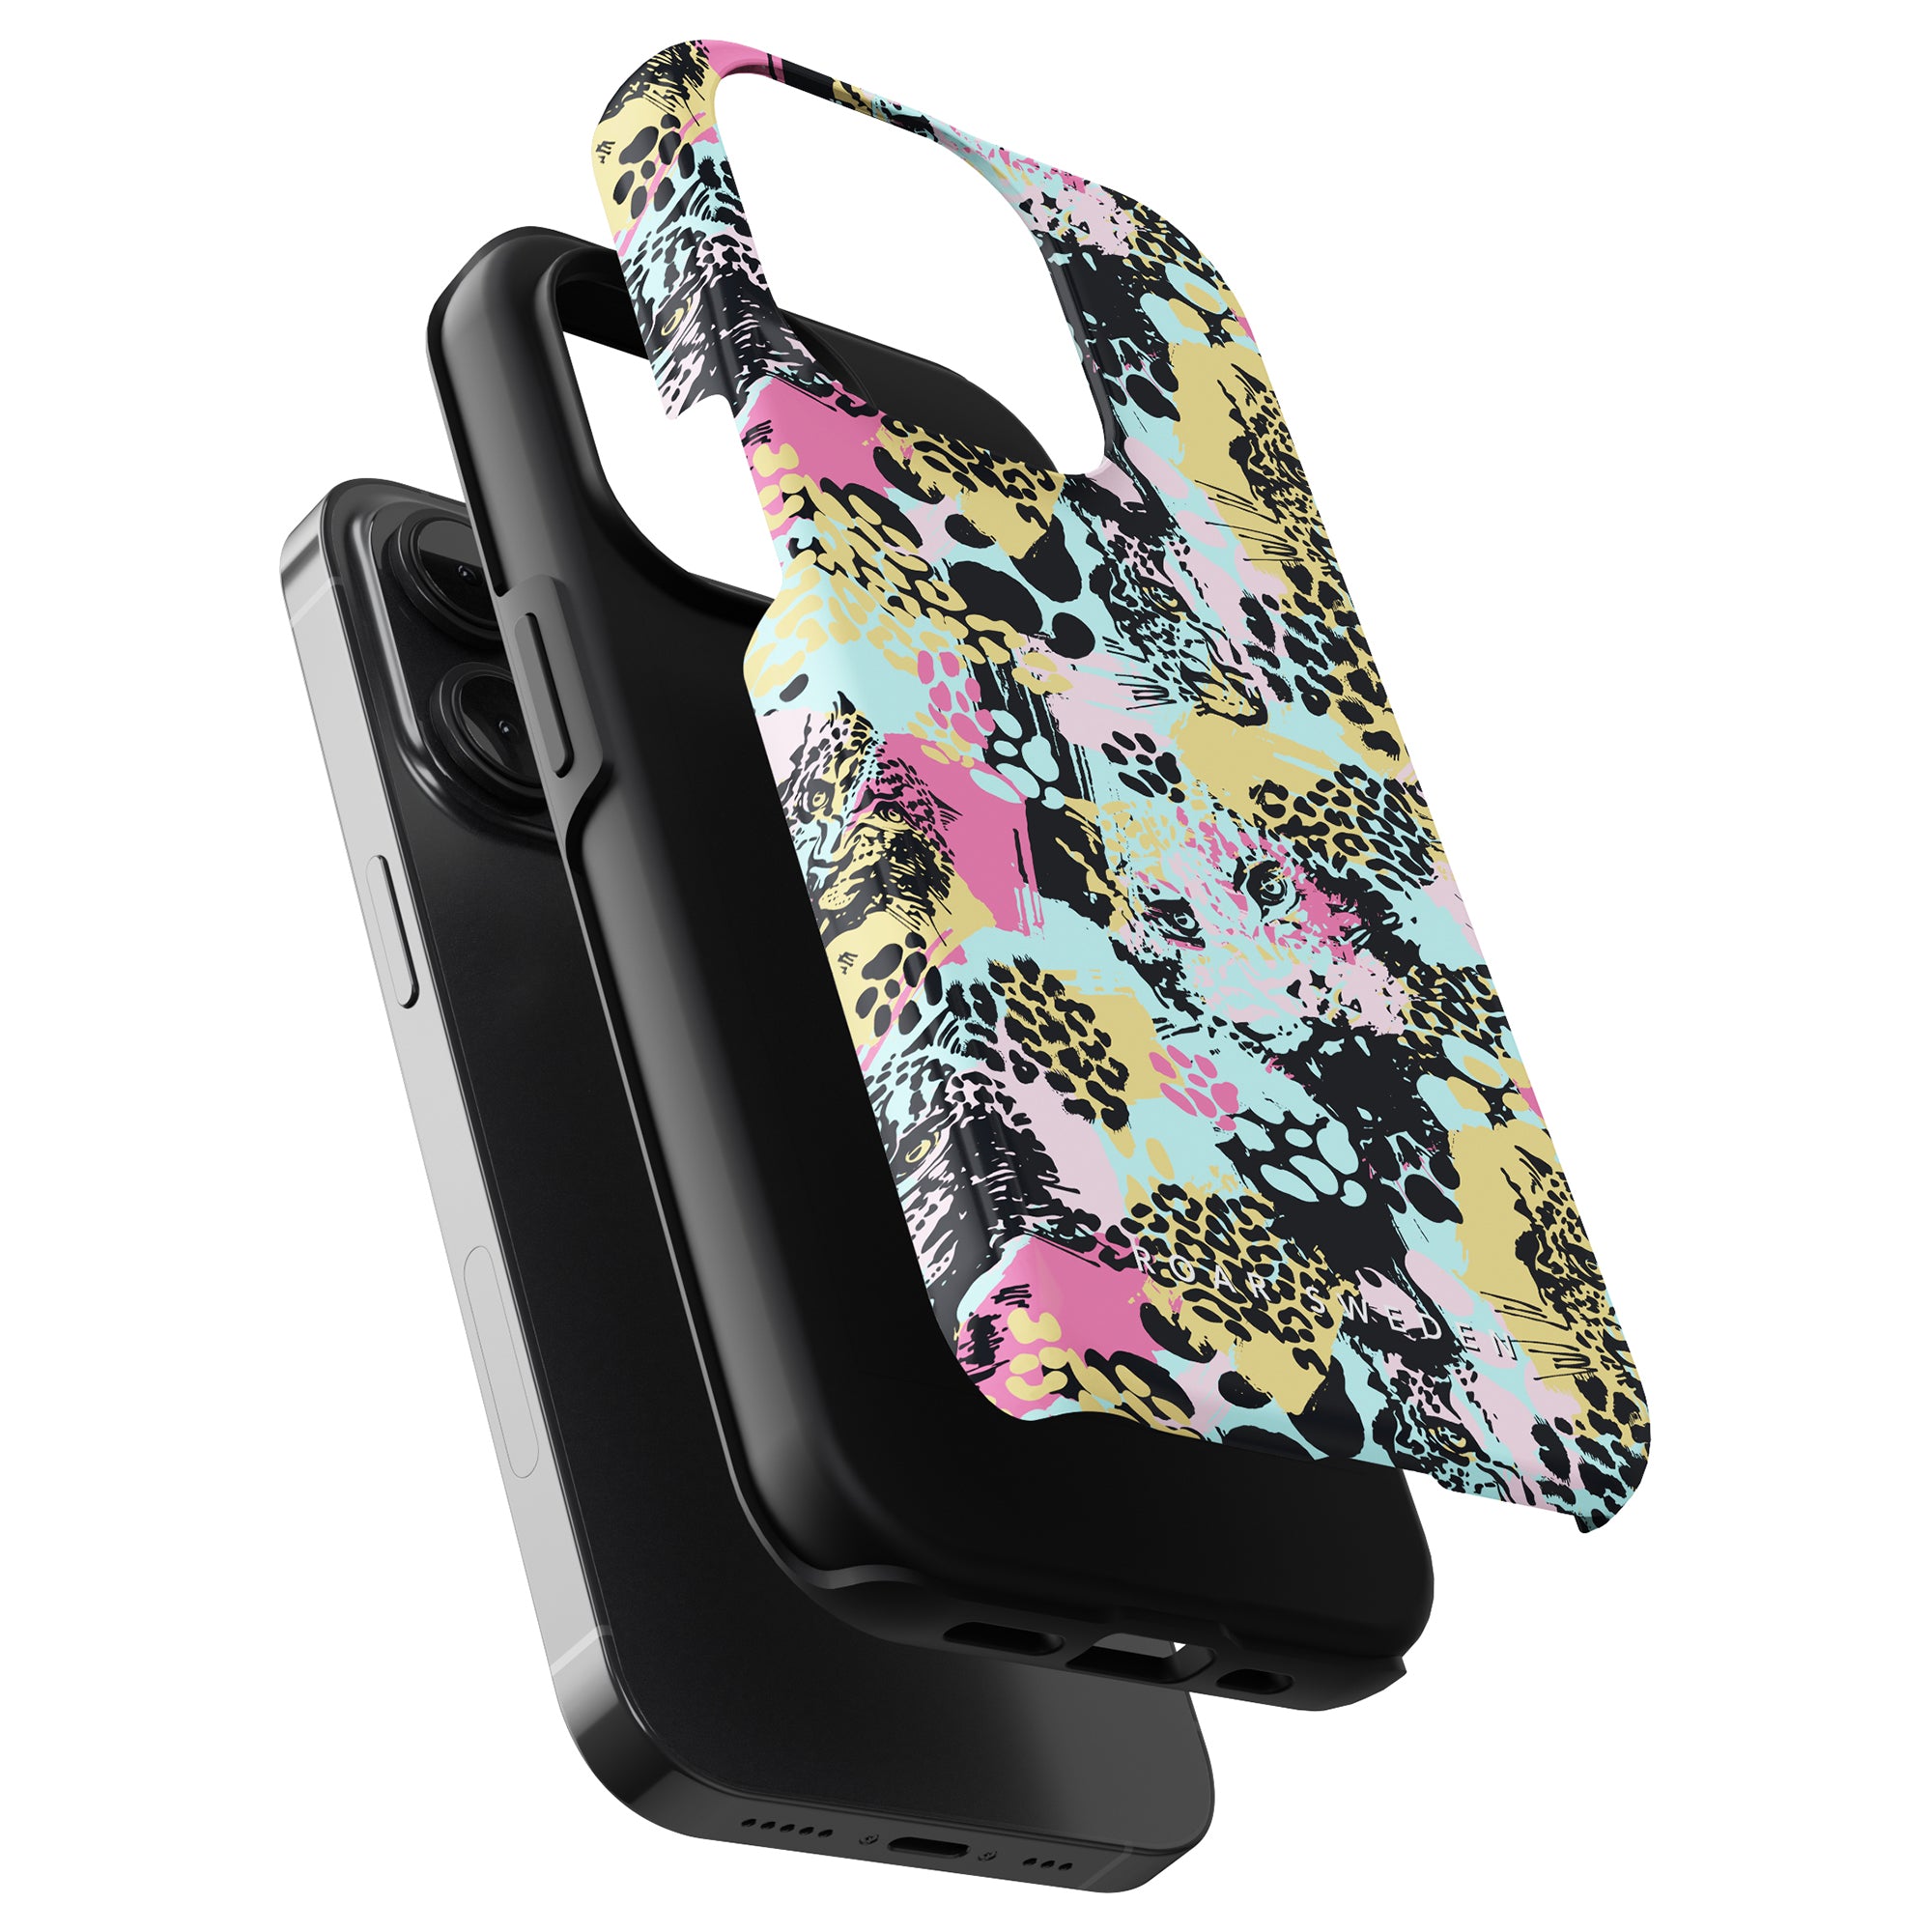 Two smartphones in cases, one with a colorful animal print strap and the other in a Bite - Tough Case, set against a white background.